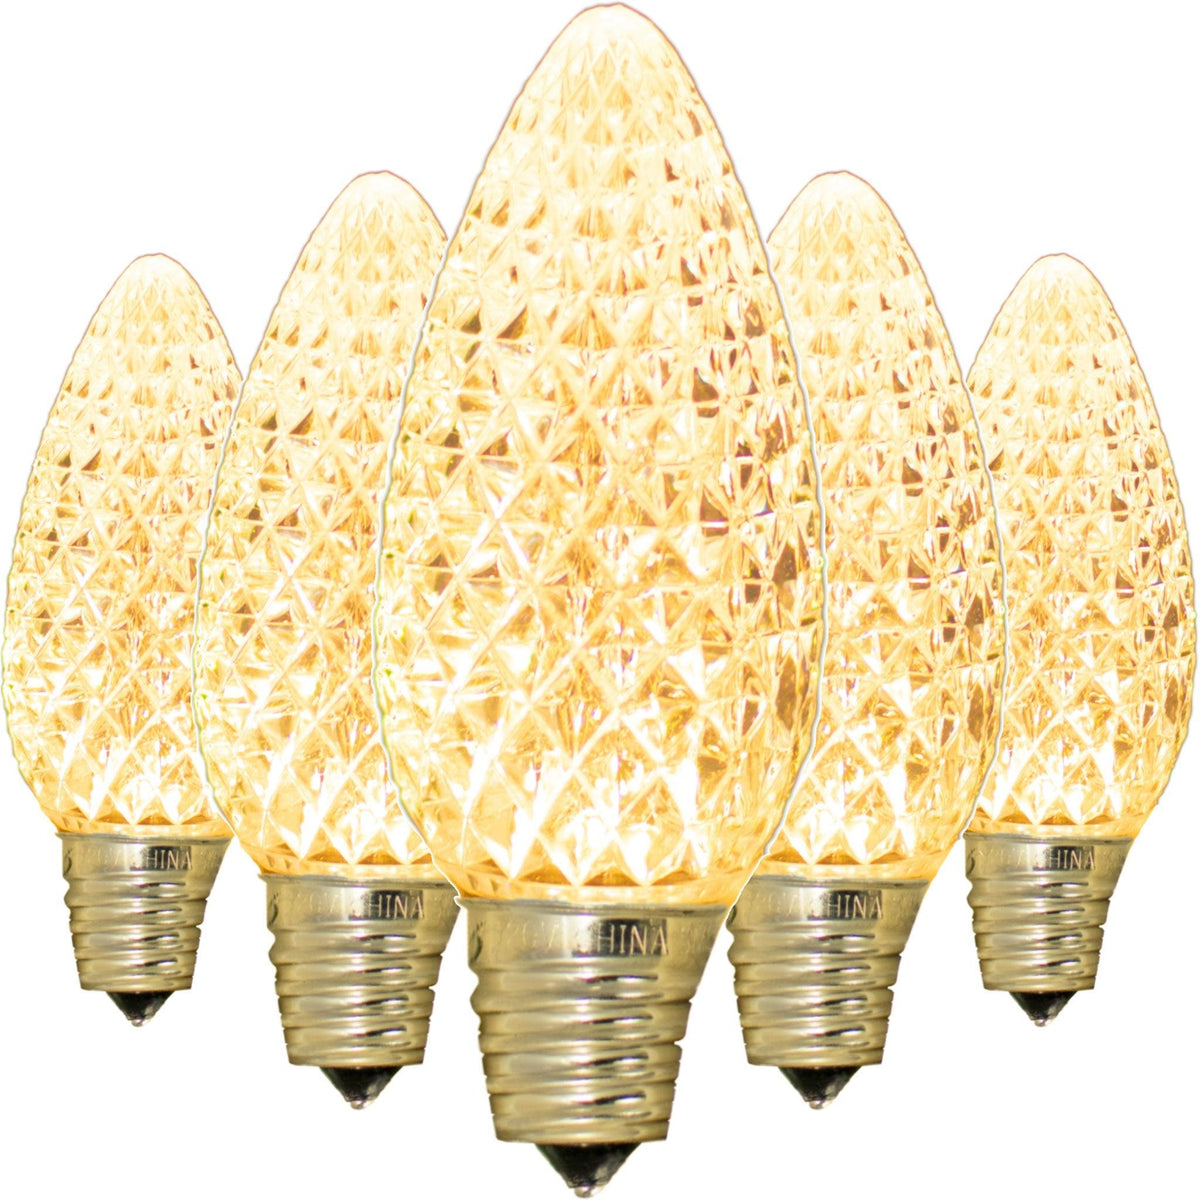 Shop Lee Display for C9 LED Faceted Sun Warm White Light Bulbs Sold in the box of 25. 0.6 Watts 120 Volts UV Protected & Waterproof Bulbs Outdoor Commercial Quality Use